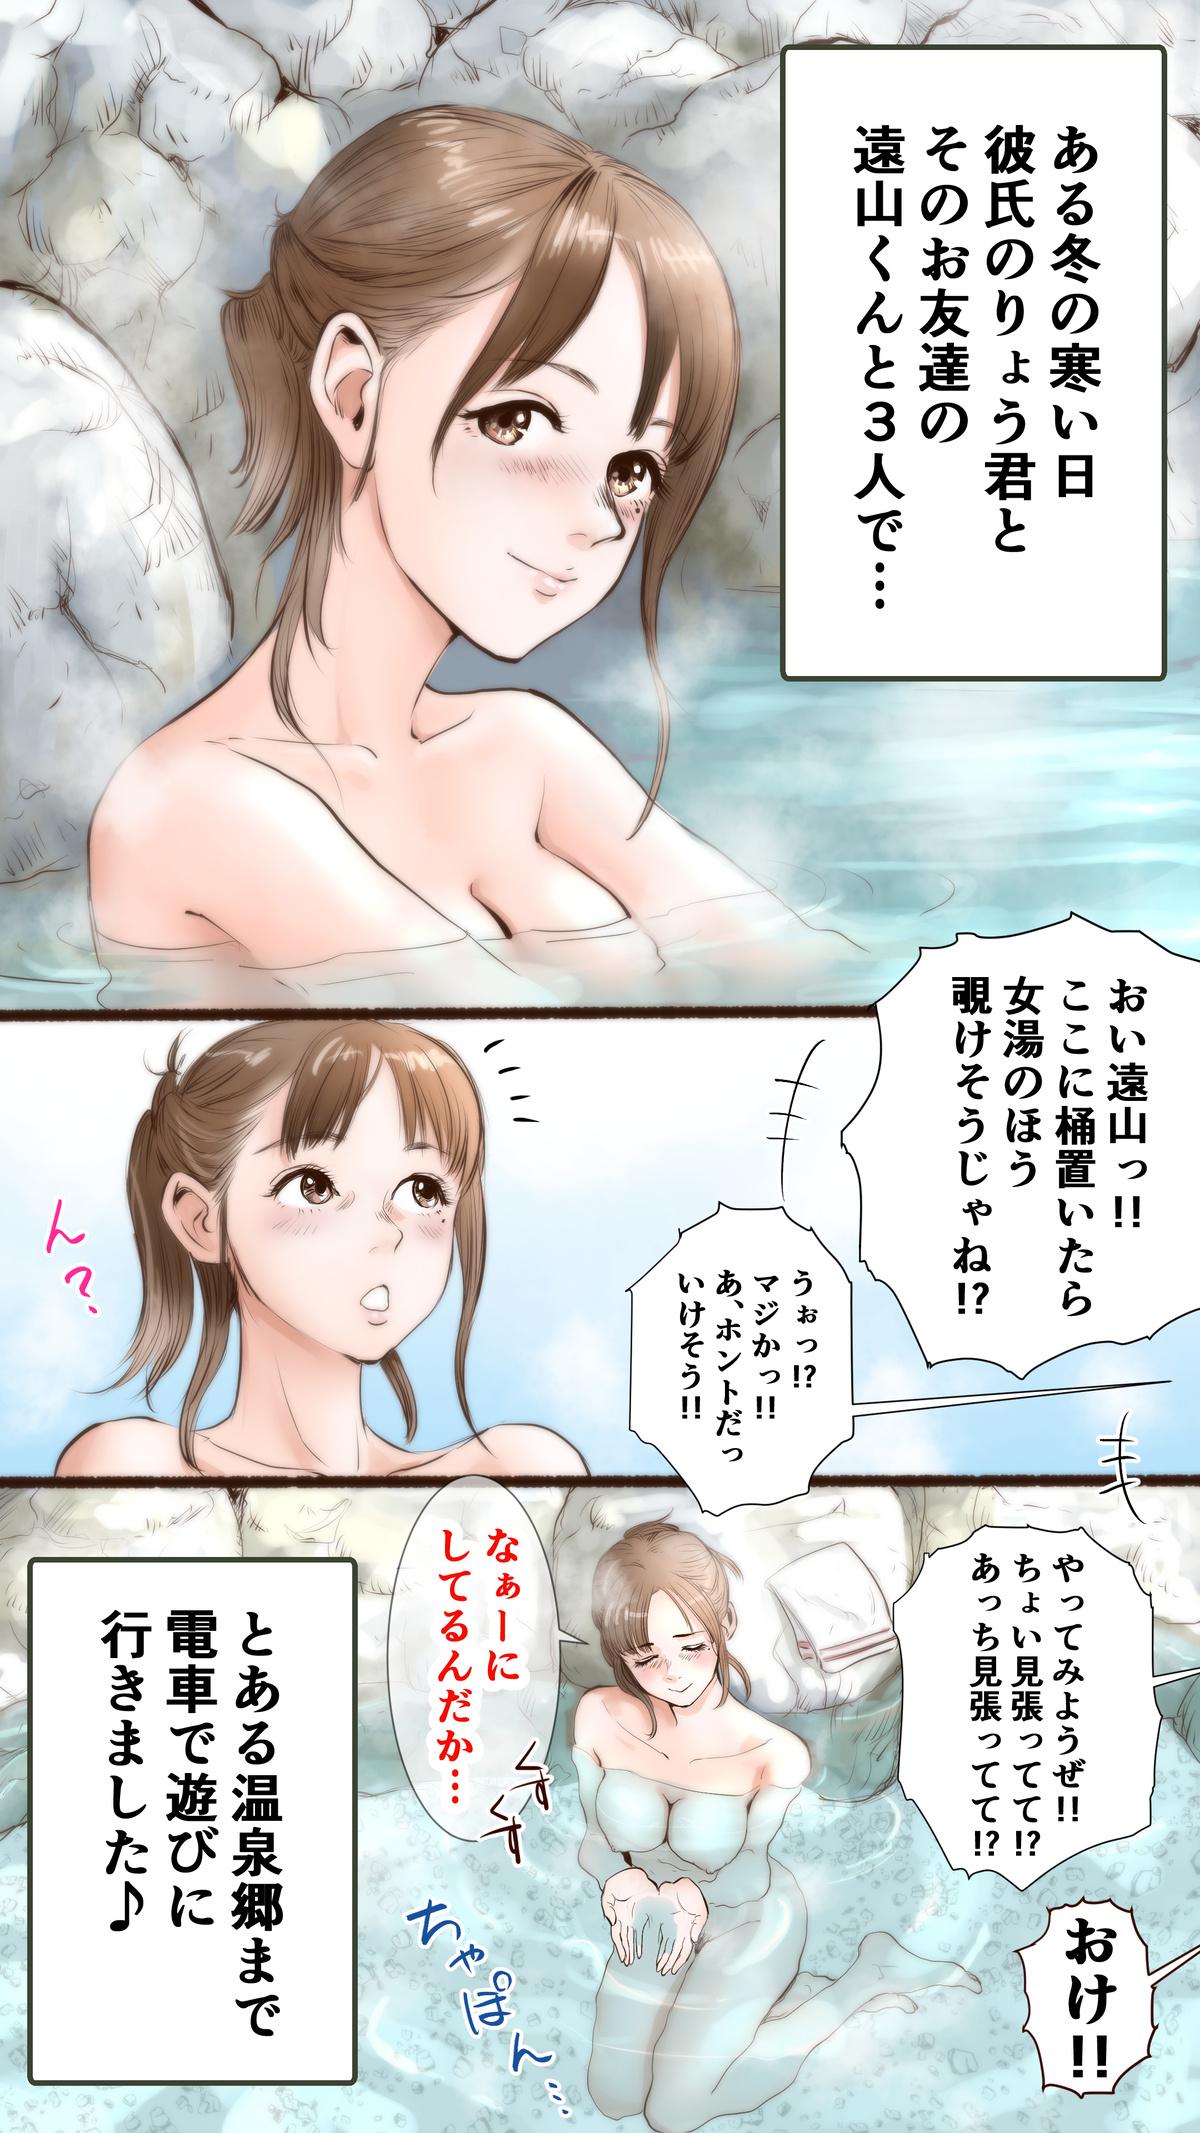 Compilation Story of Hot Spring Hotel Pervert - Picture 1